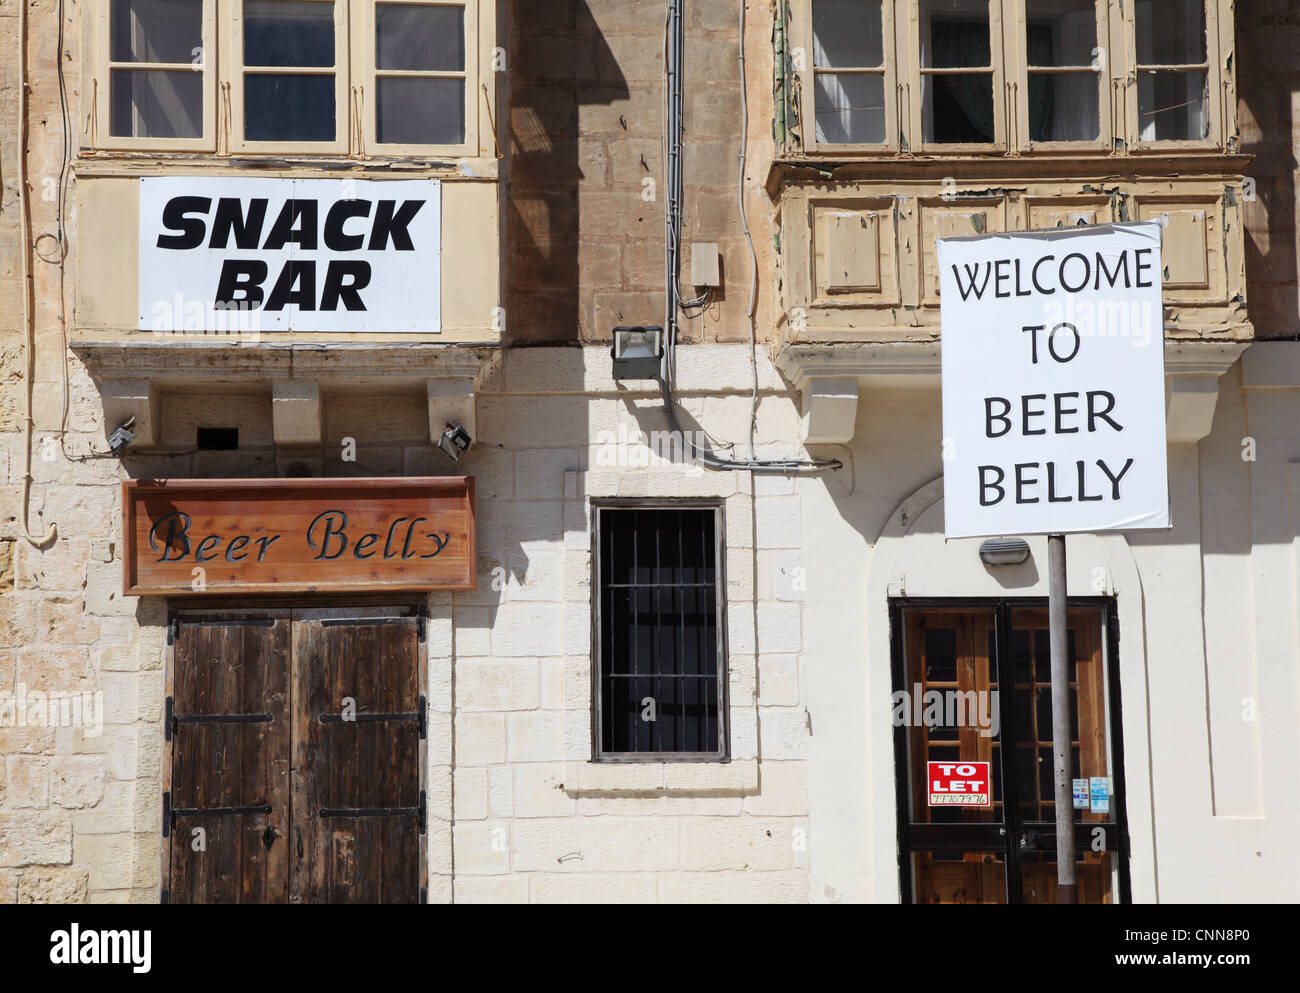 Welcome to the Beer Belly snack bar in Rabat ,Malta, Europe Stock Photo